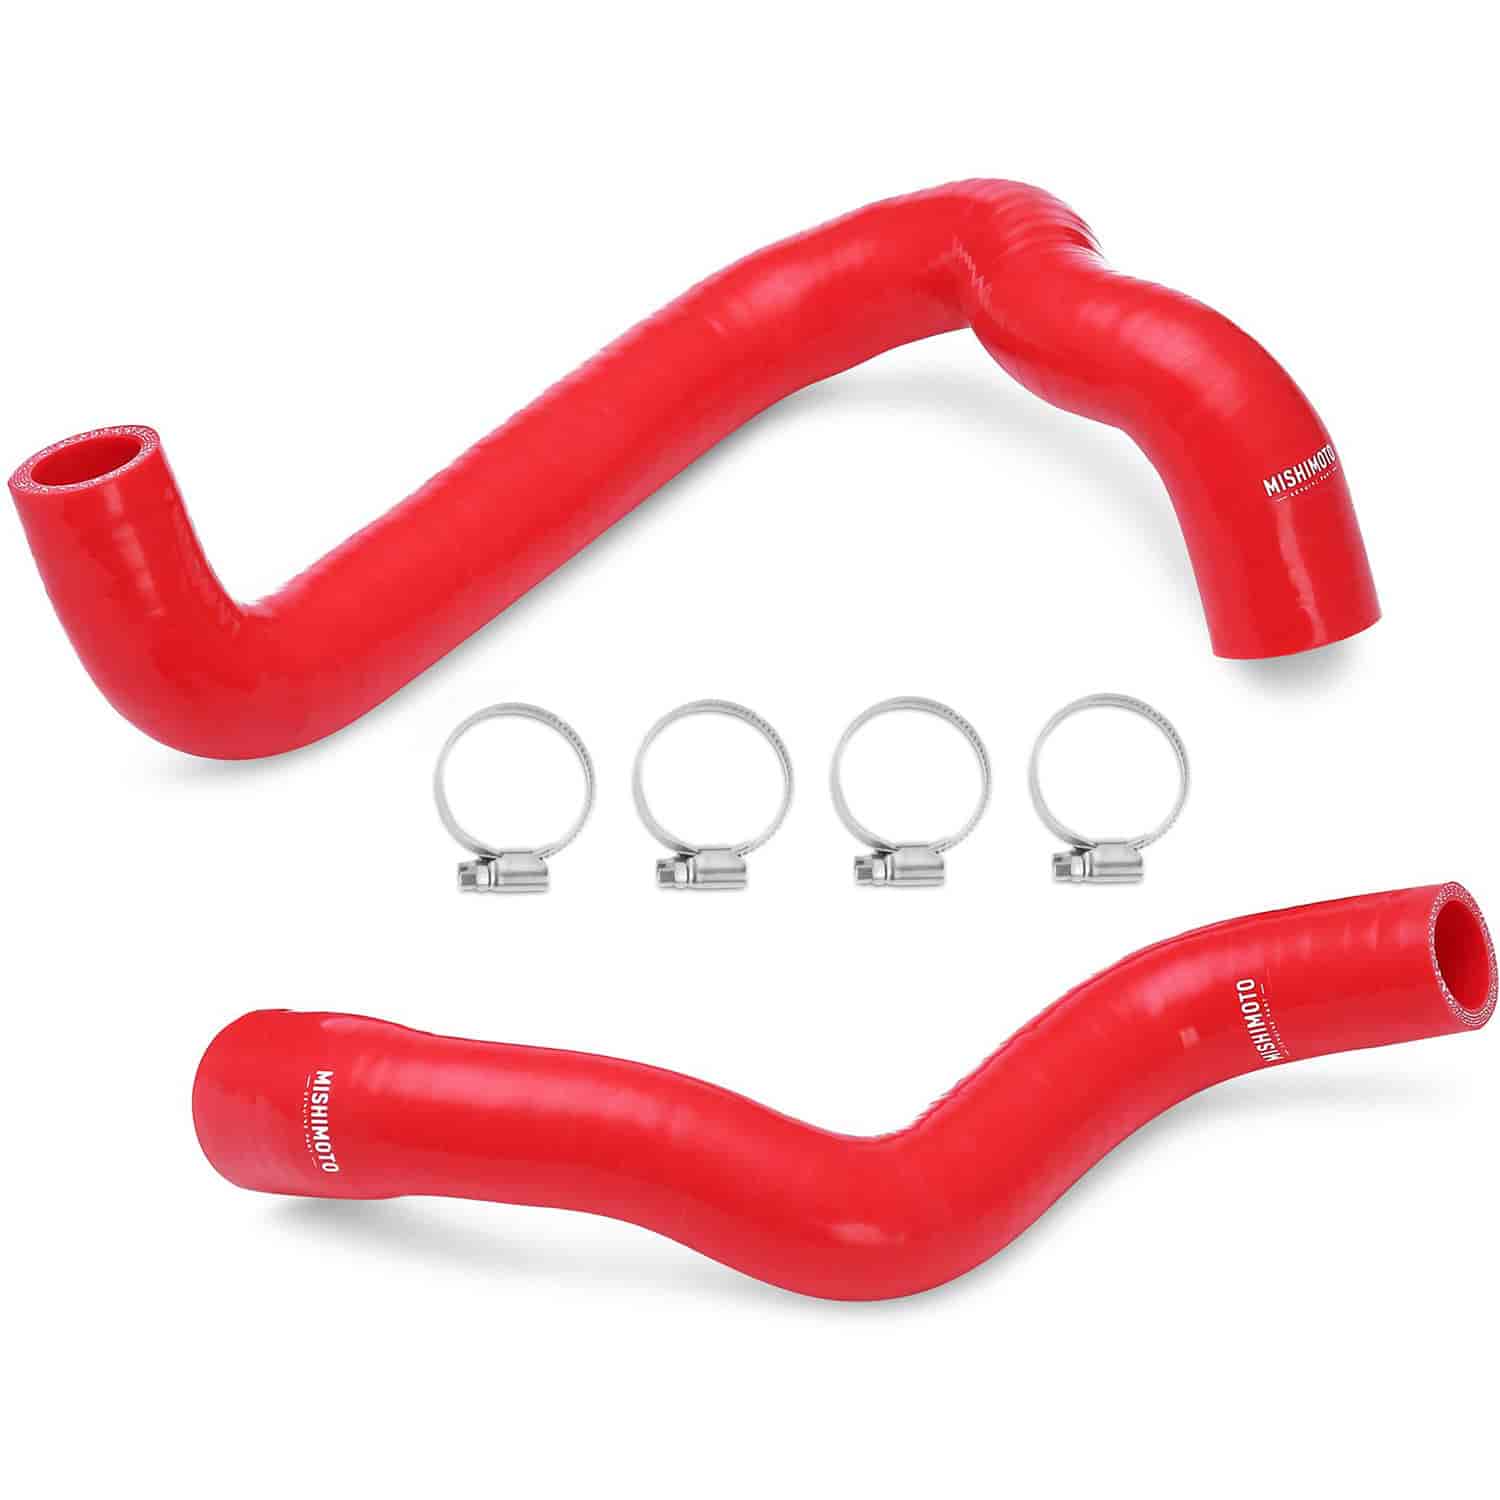 Ford Fiesta ST Silicone Radiator Hose Kit - MFG Part No. MMHOSE-FIST-14RD